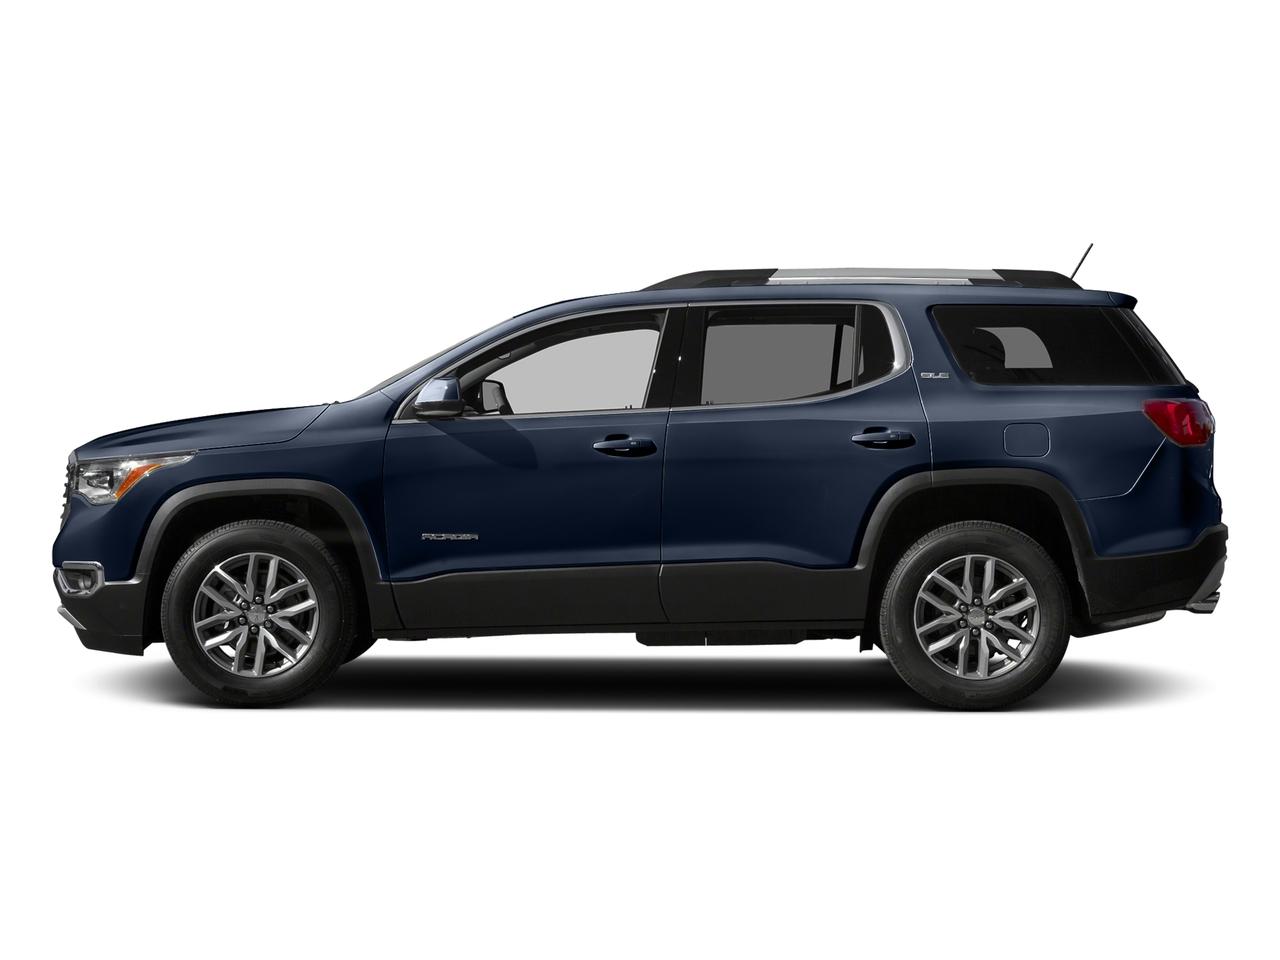 Used 2017 GMC Acadia SLE-2 with VIN 1GKKNLLS7HZ289429 for sale in Hannibal, MO